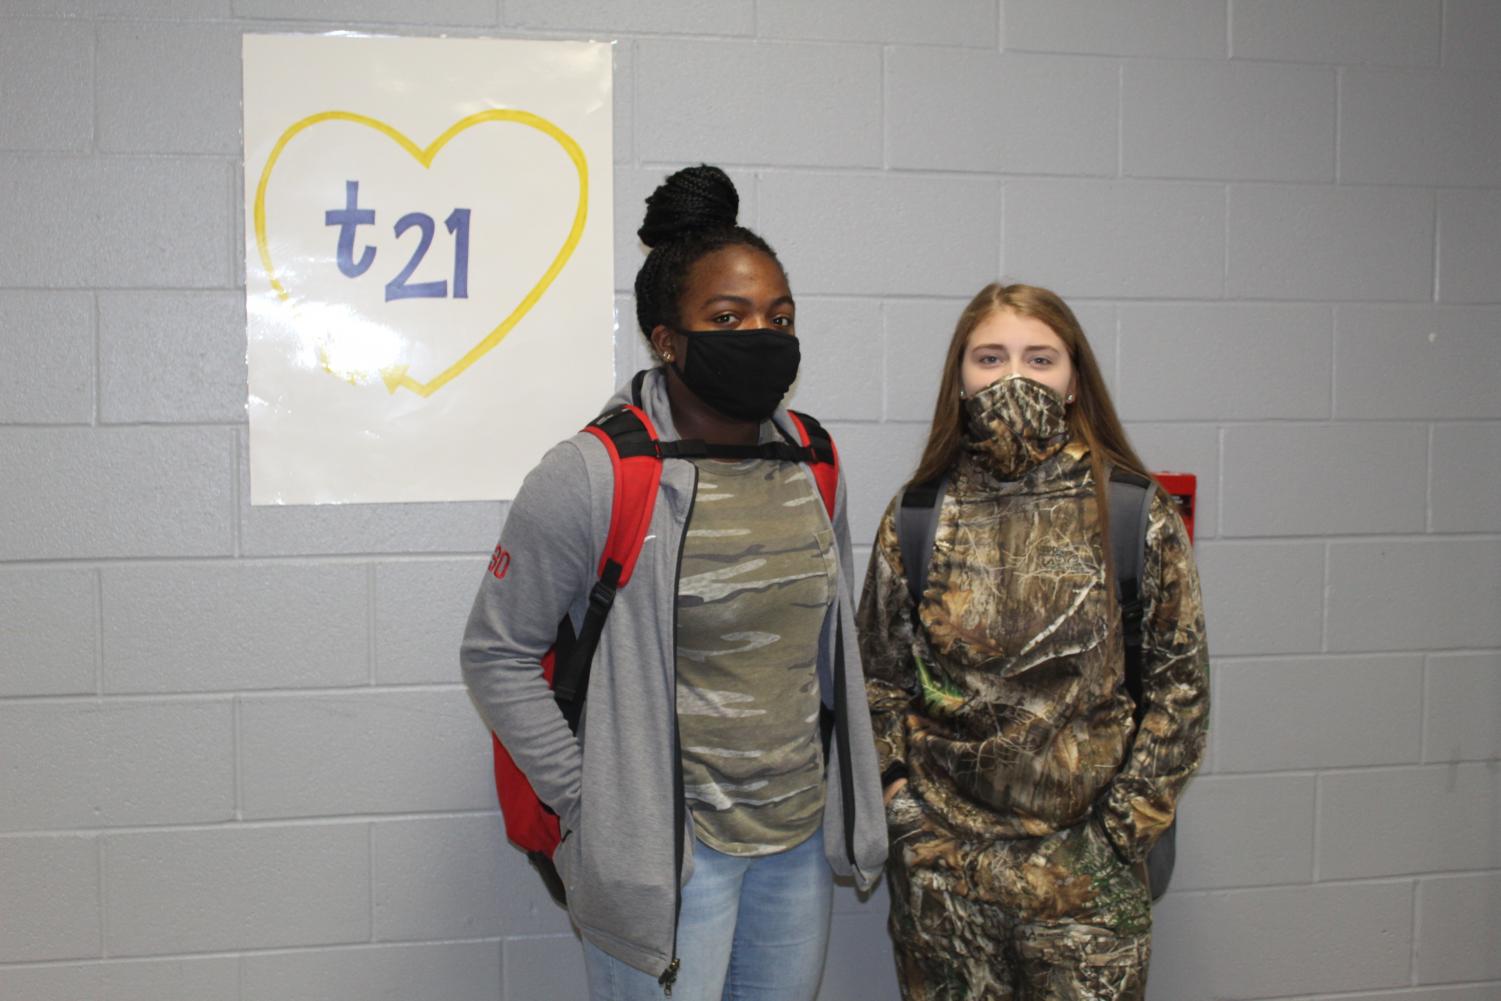 Slideshow%3A+Homecoming+Camo+Day+%26+Bullying+Prevention+Unity+Day%2C+10-21-2020